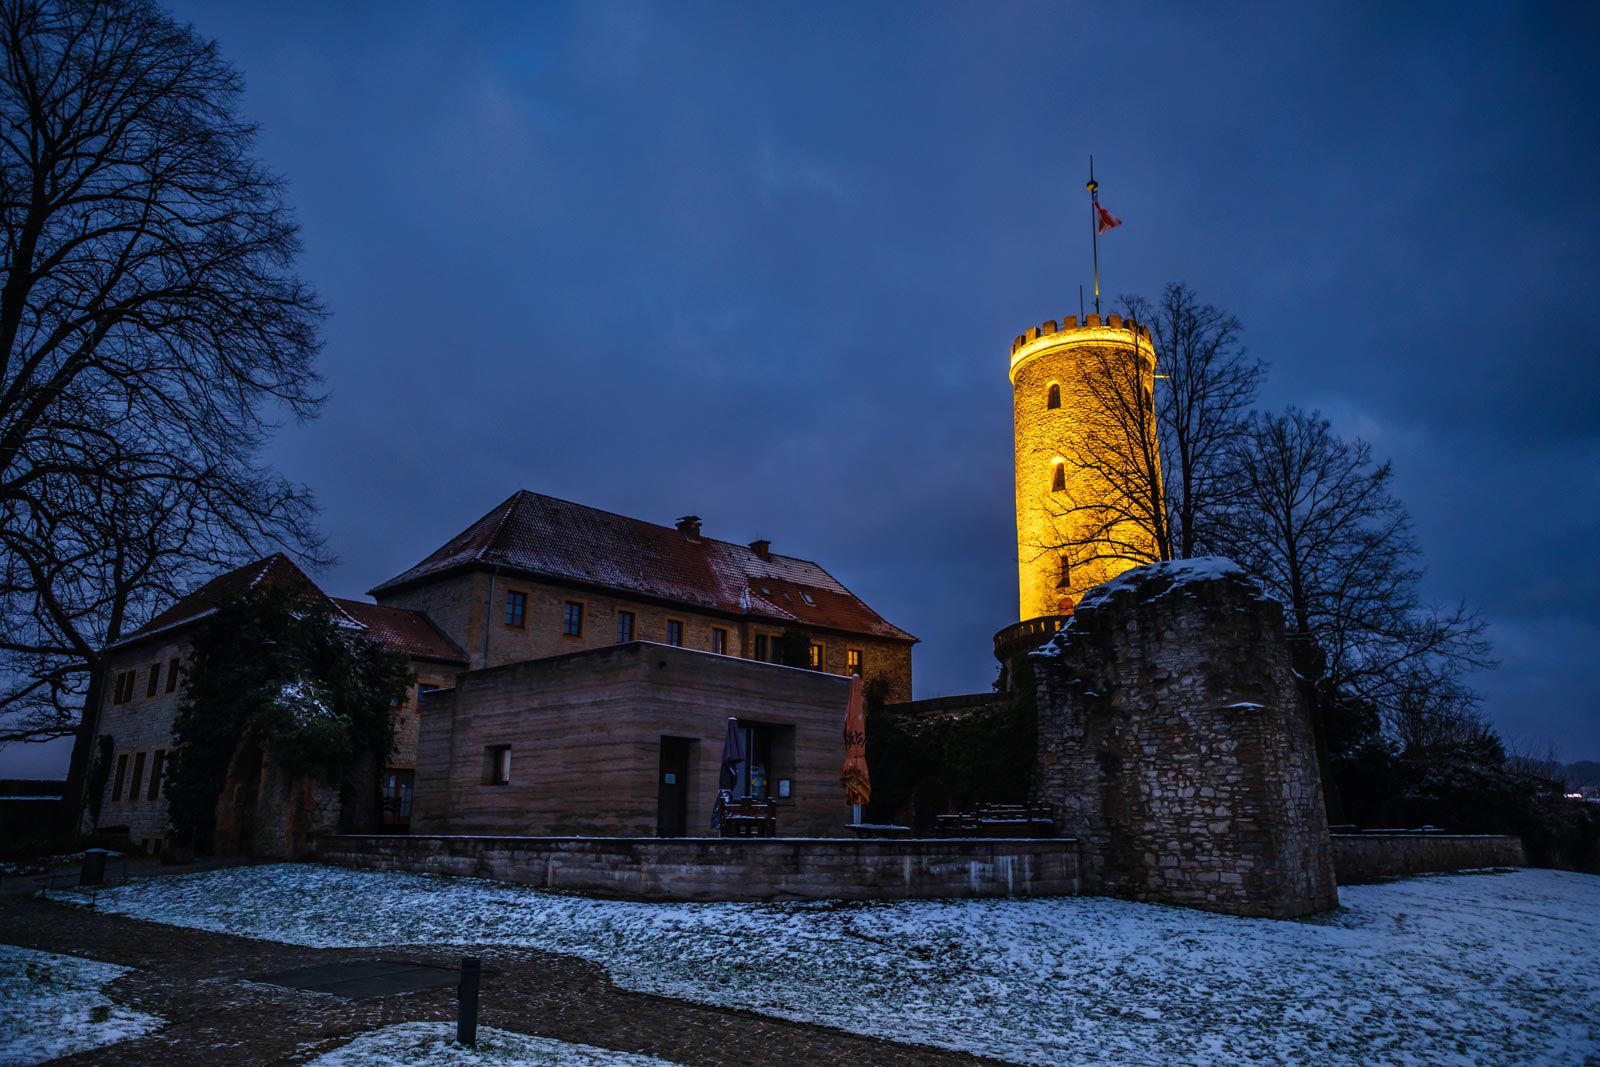 Early winter morning at the 'Sparrenburg' on January 9, 2021 (Bielefeld, Germany).